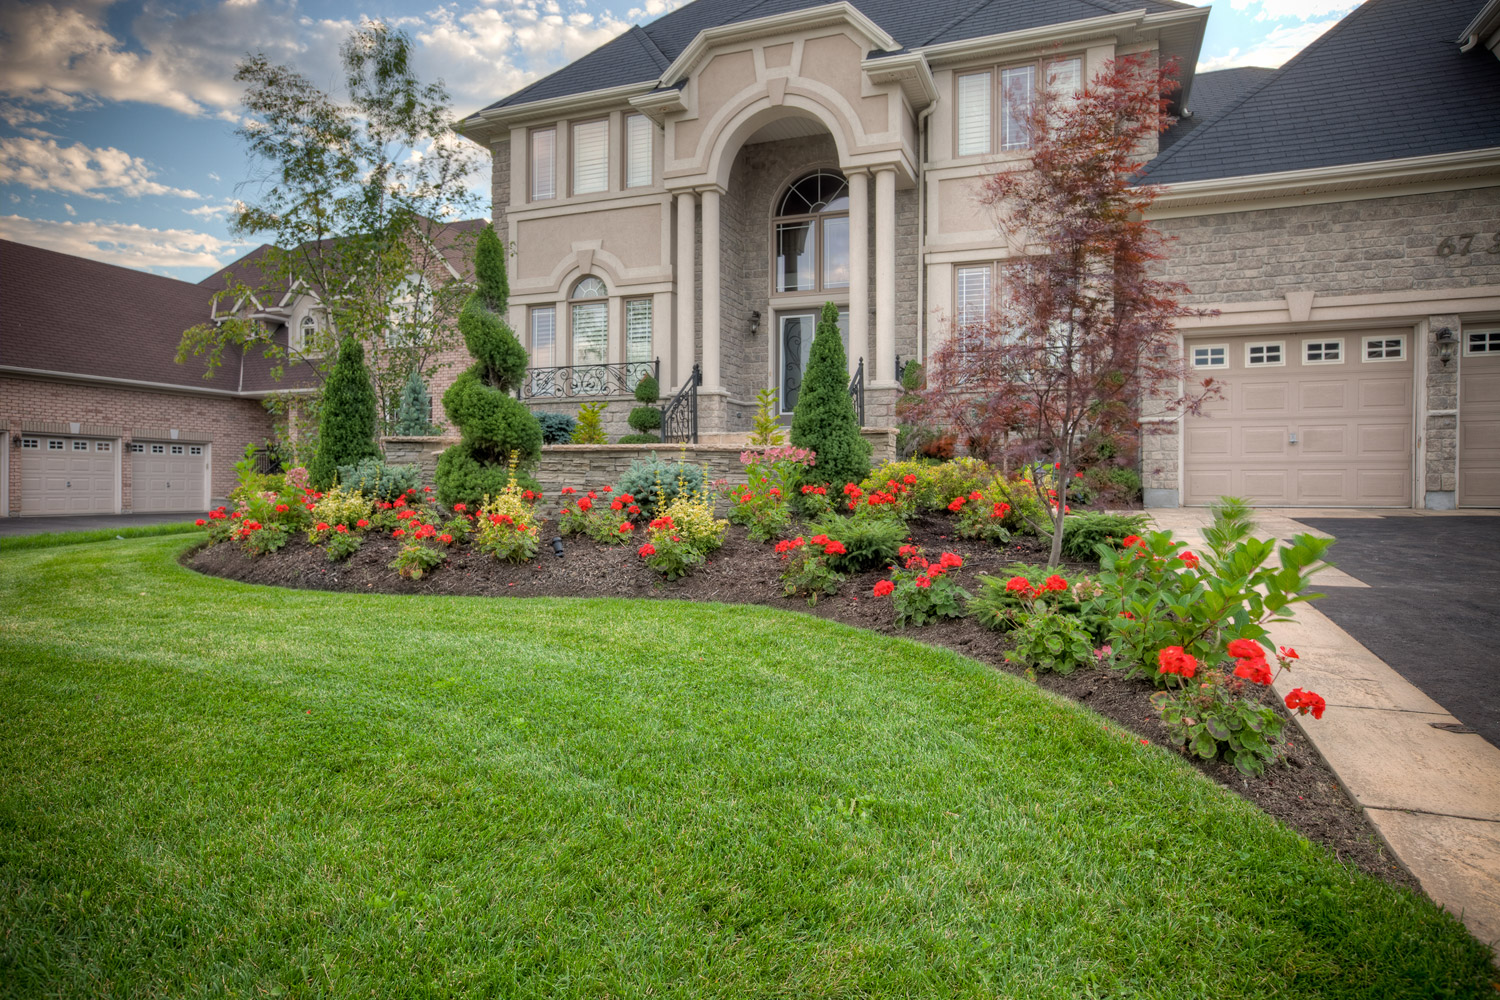 Front Landscaping Designs - Image to u